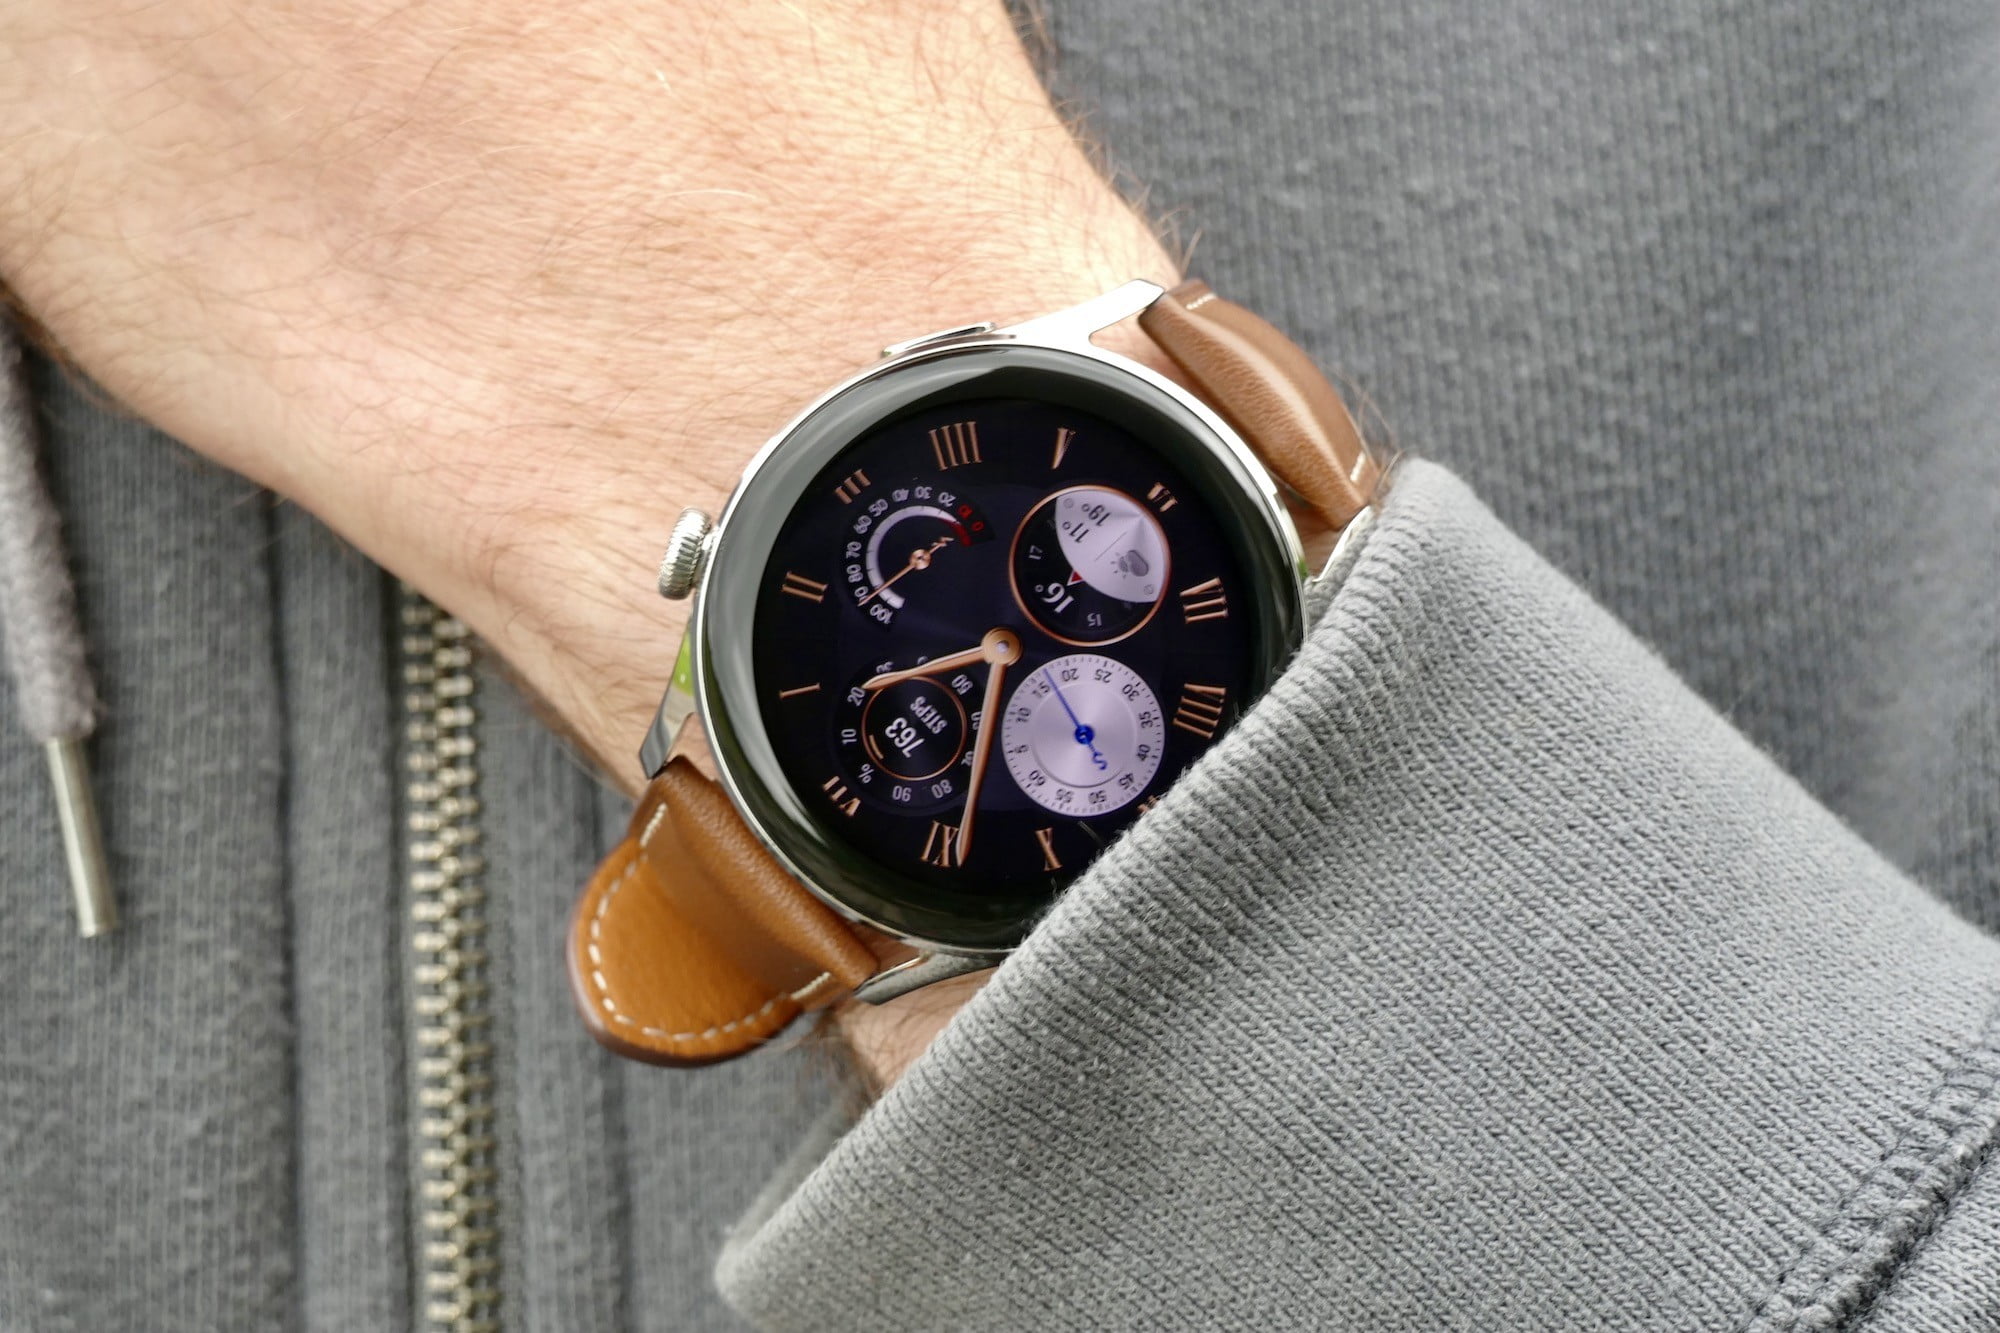 Huawei Watch 3 and Watch 3 Pro smartwatches wait for major update in global market